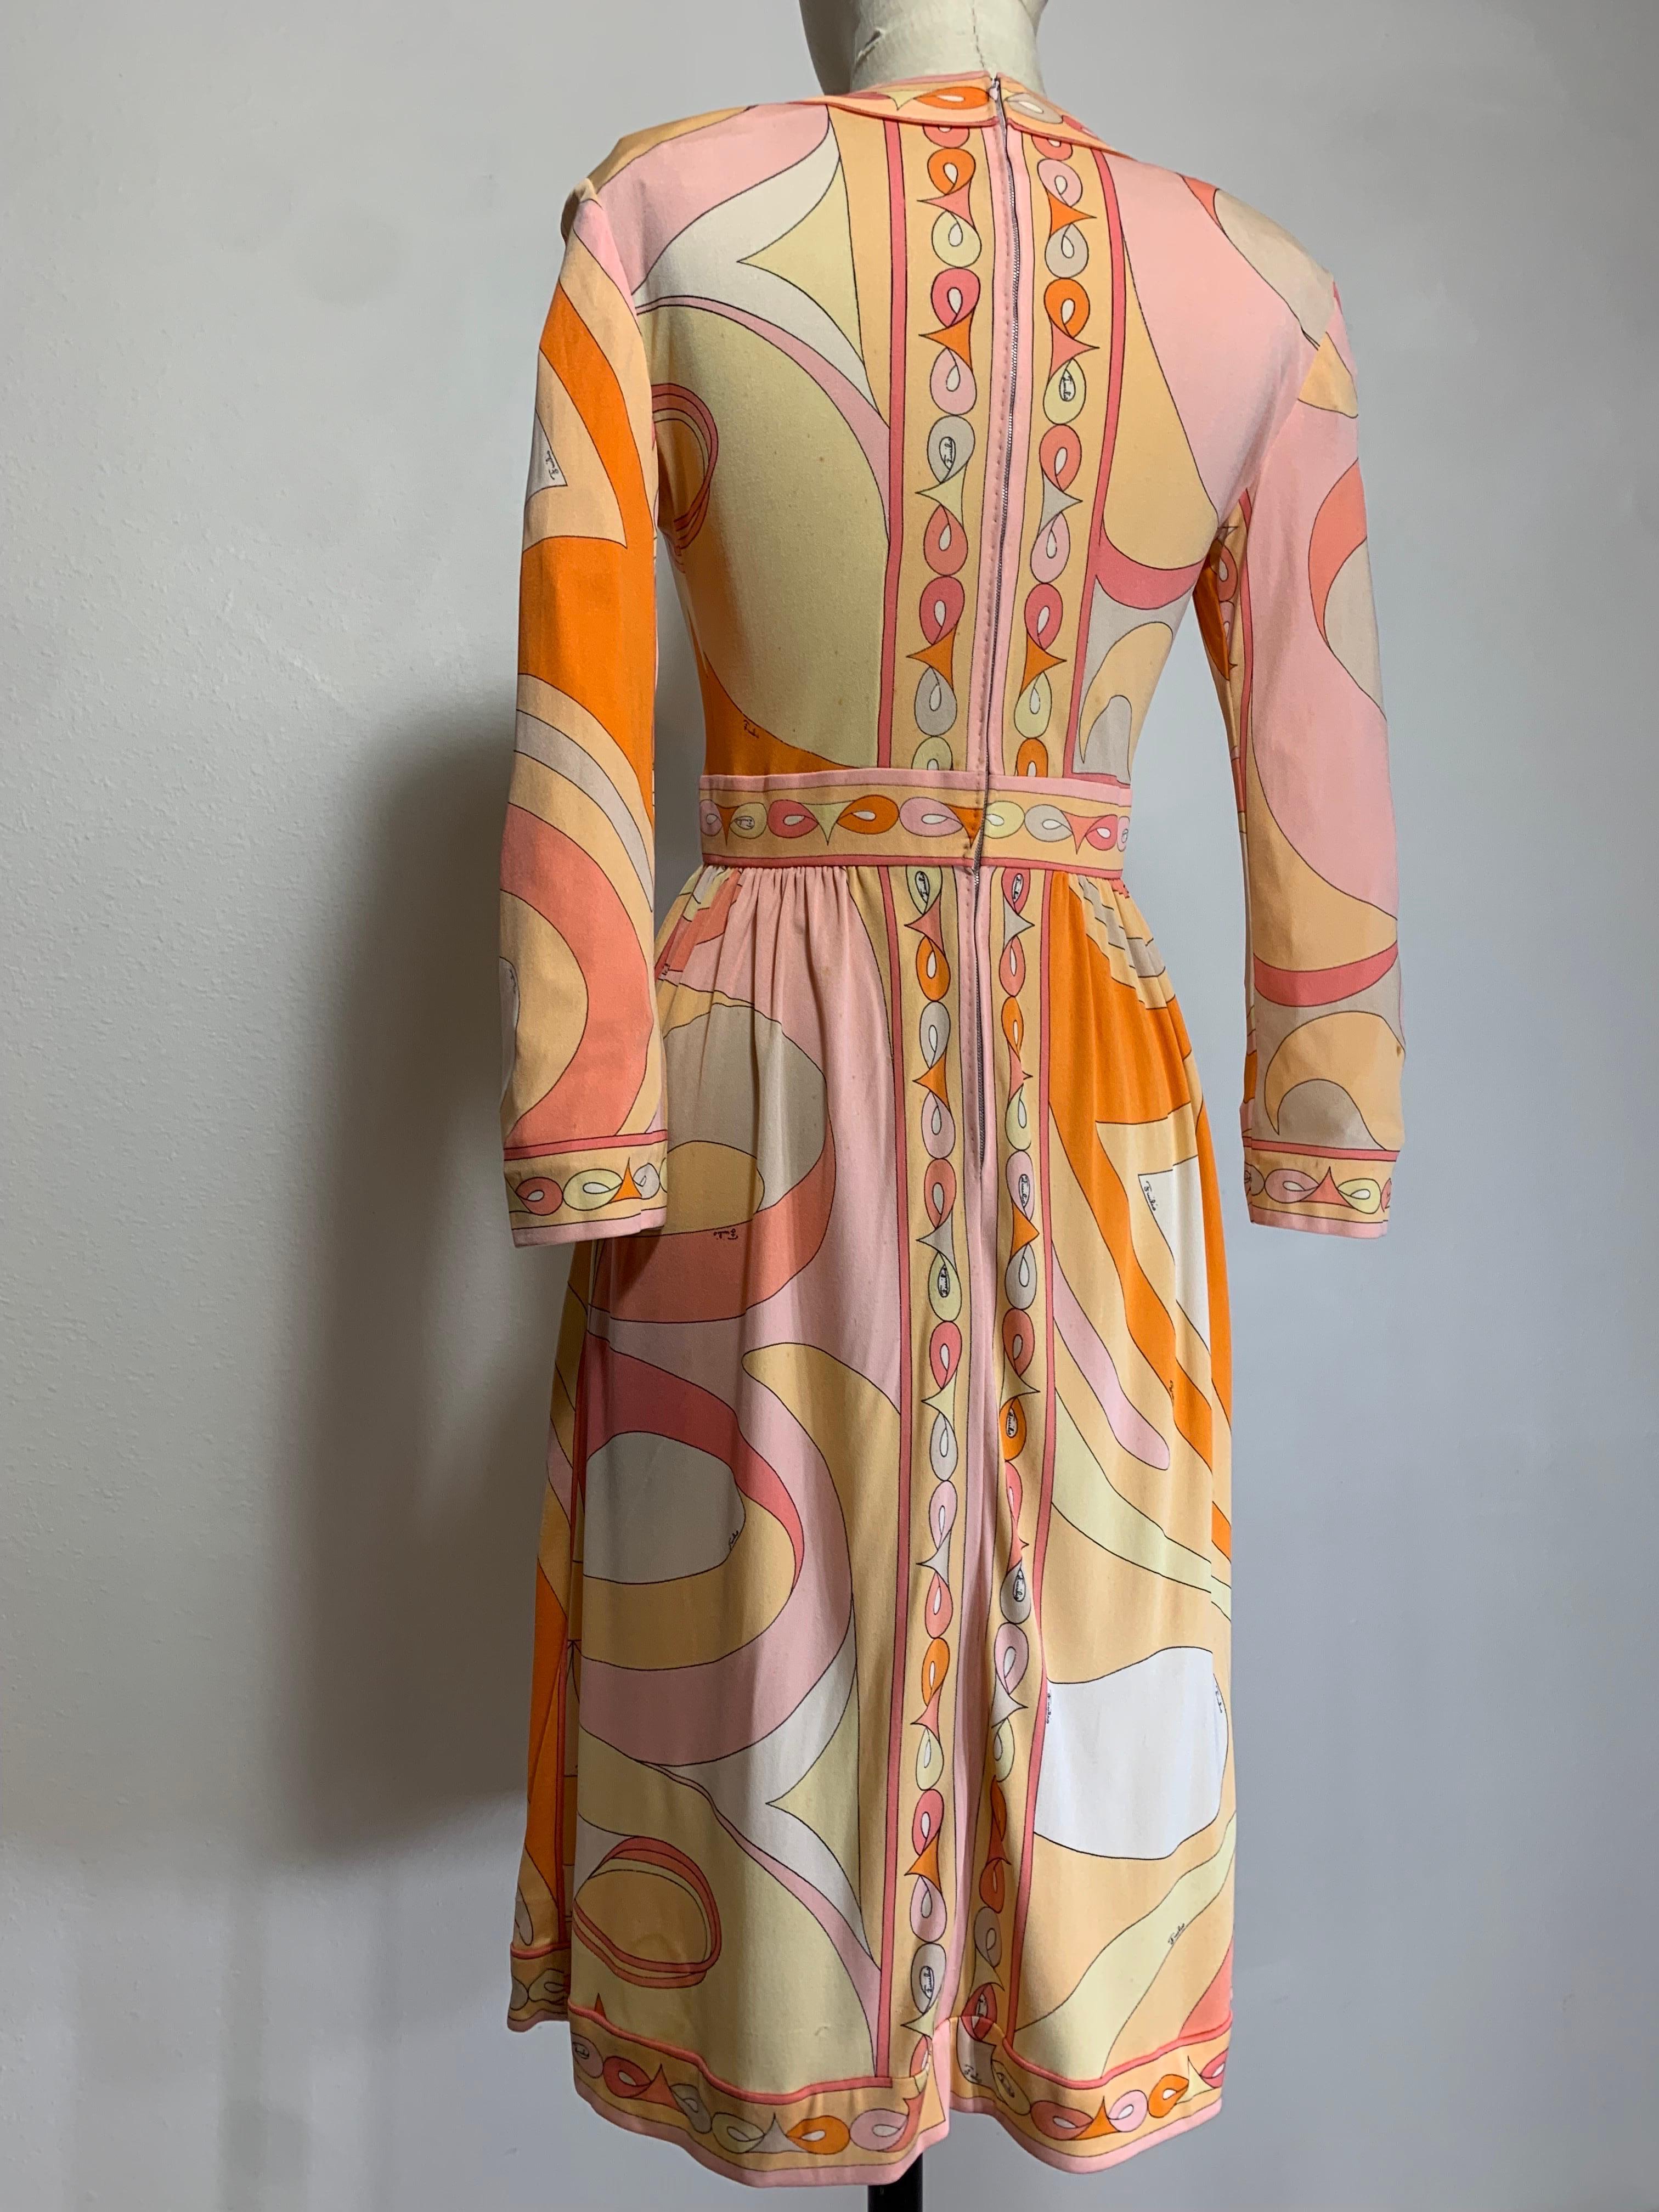 1960er Emilio Pucci Psychedelic Print Mod Day Dress w Full Skirt in Tangerine  im Angebot 7